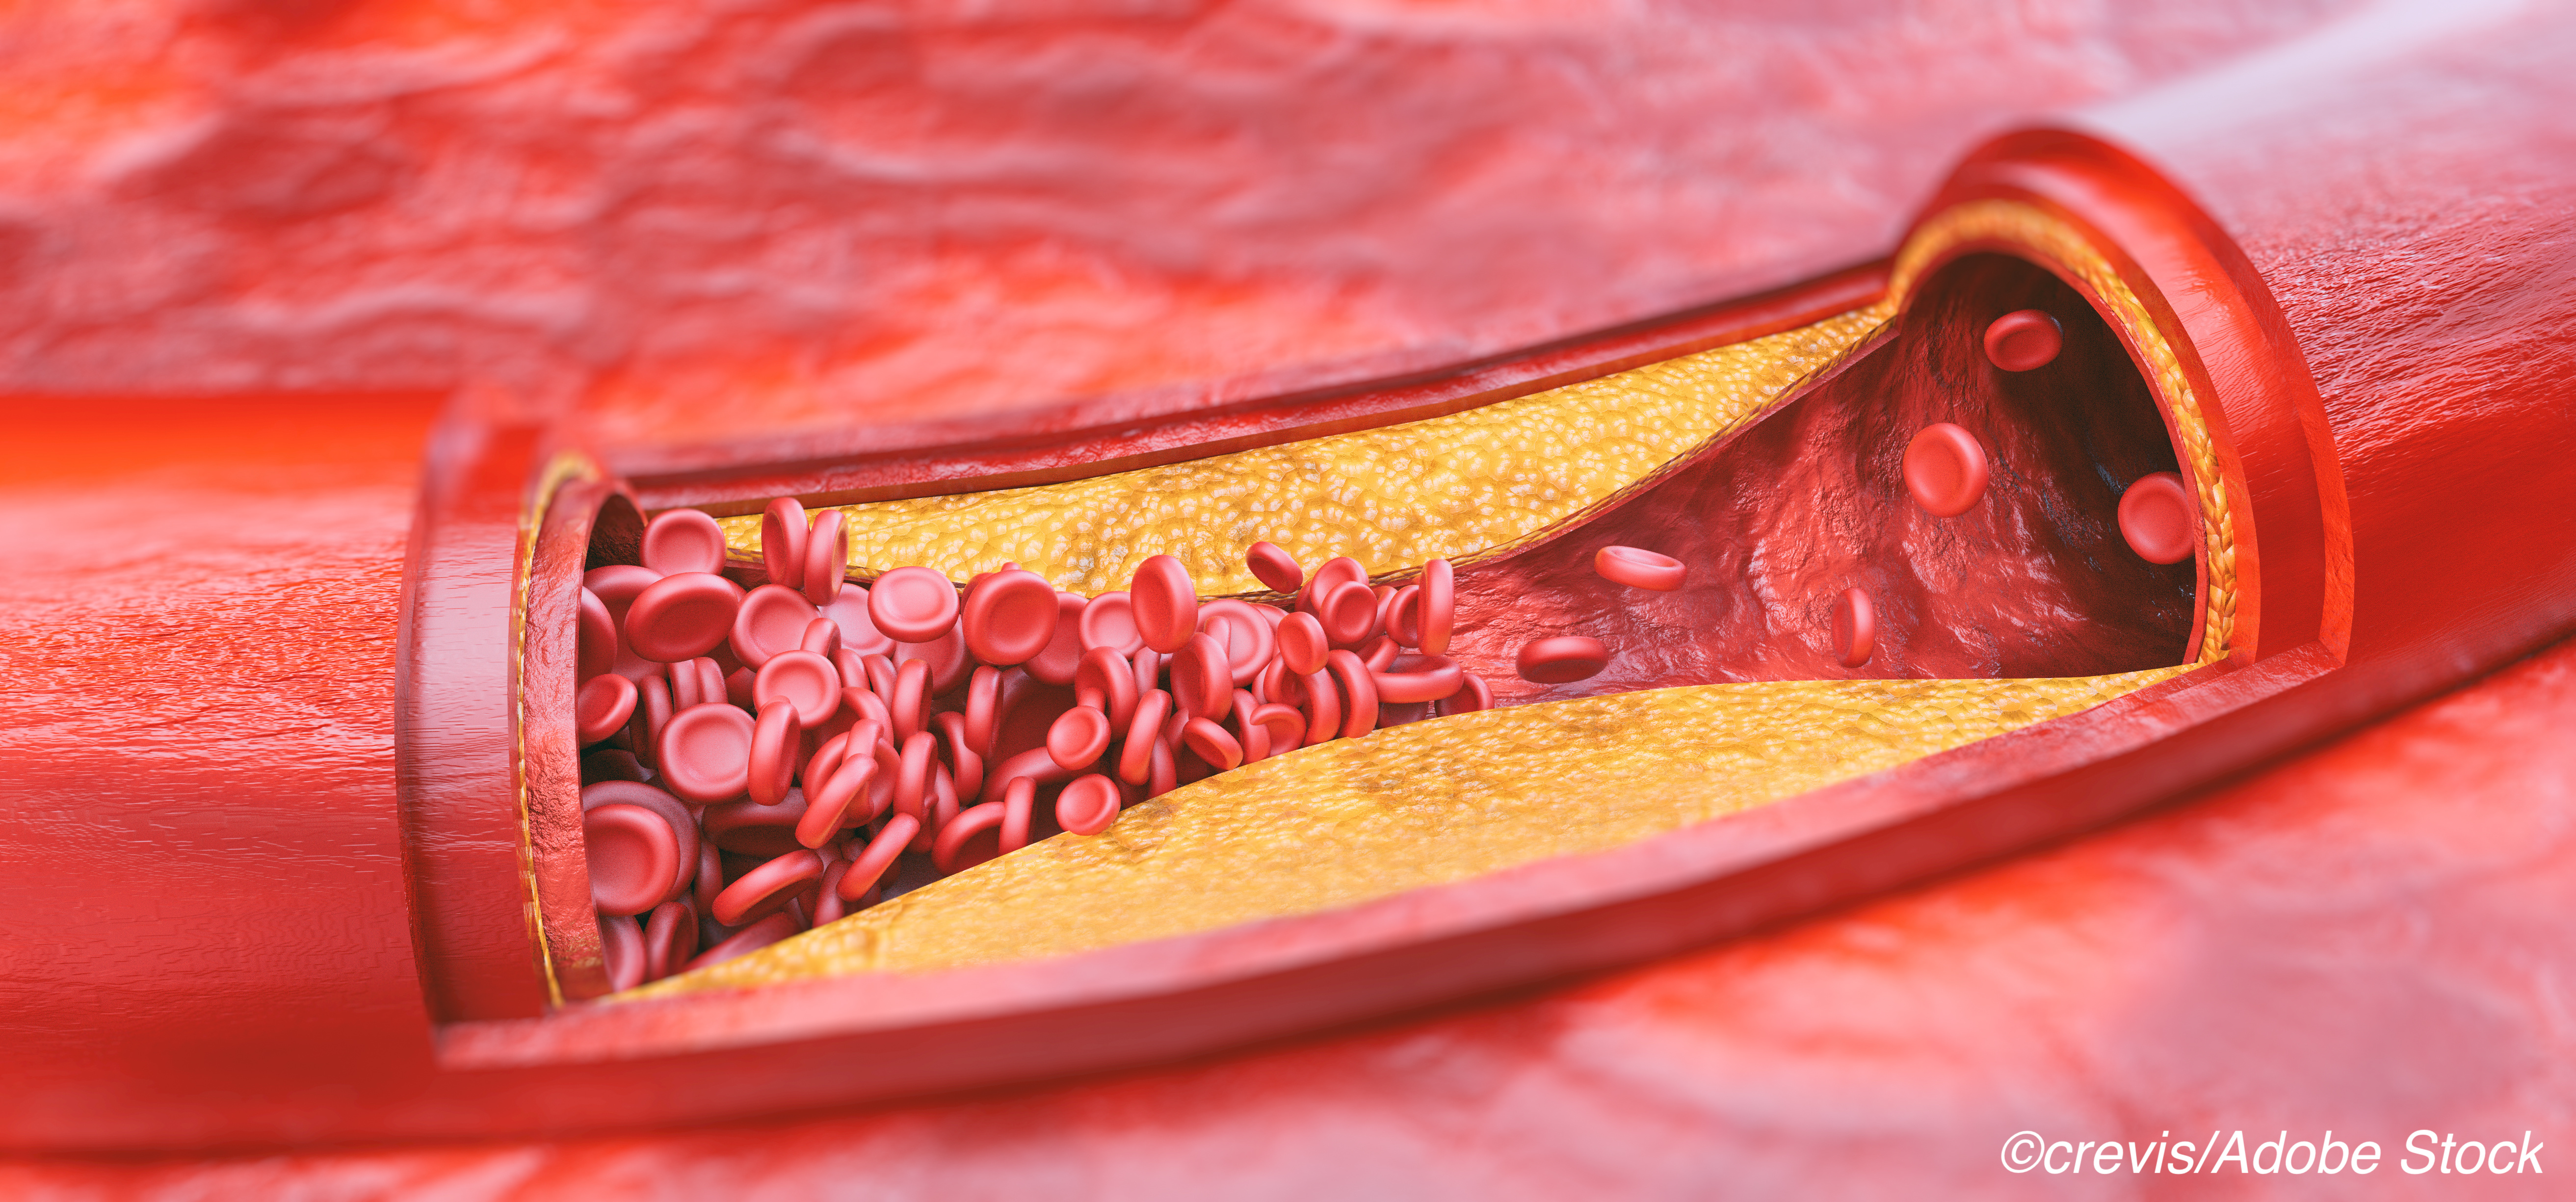 CPC Tied to Renal Insufficiency in Older CAD Patients